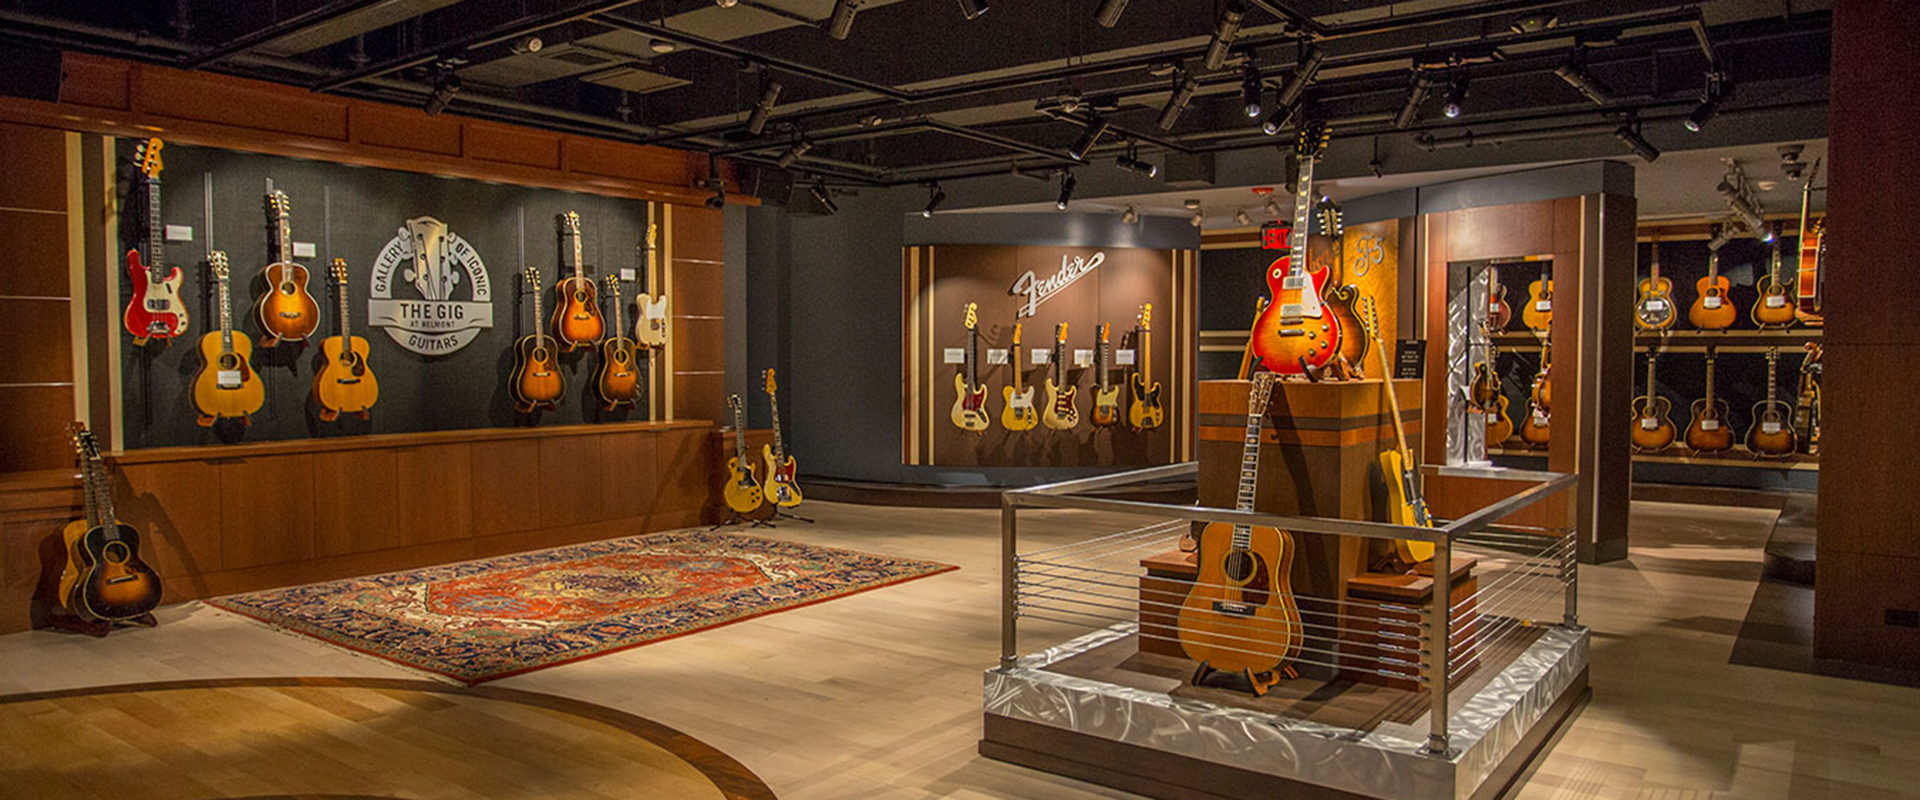 The Gallery of Iconic Guitars (The GIG) at Belmont, Nashville, TN © Wallace Powers